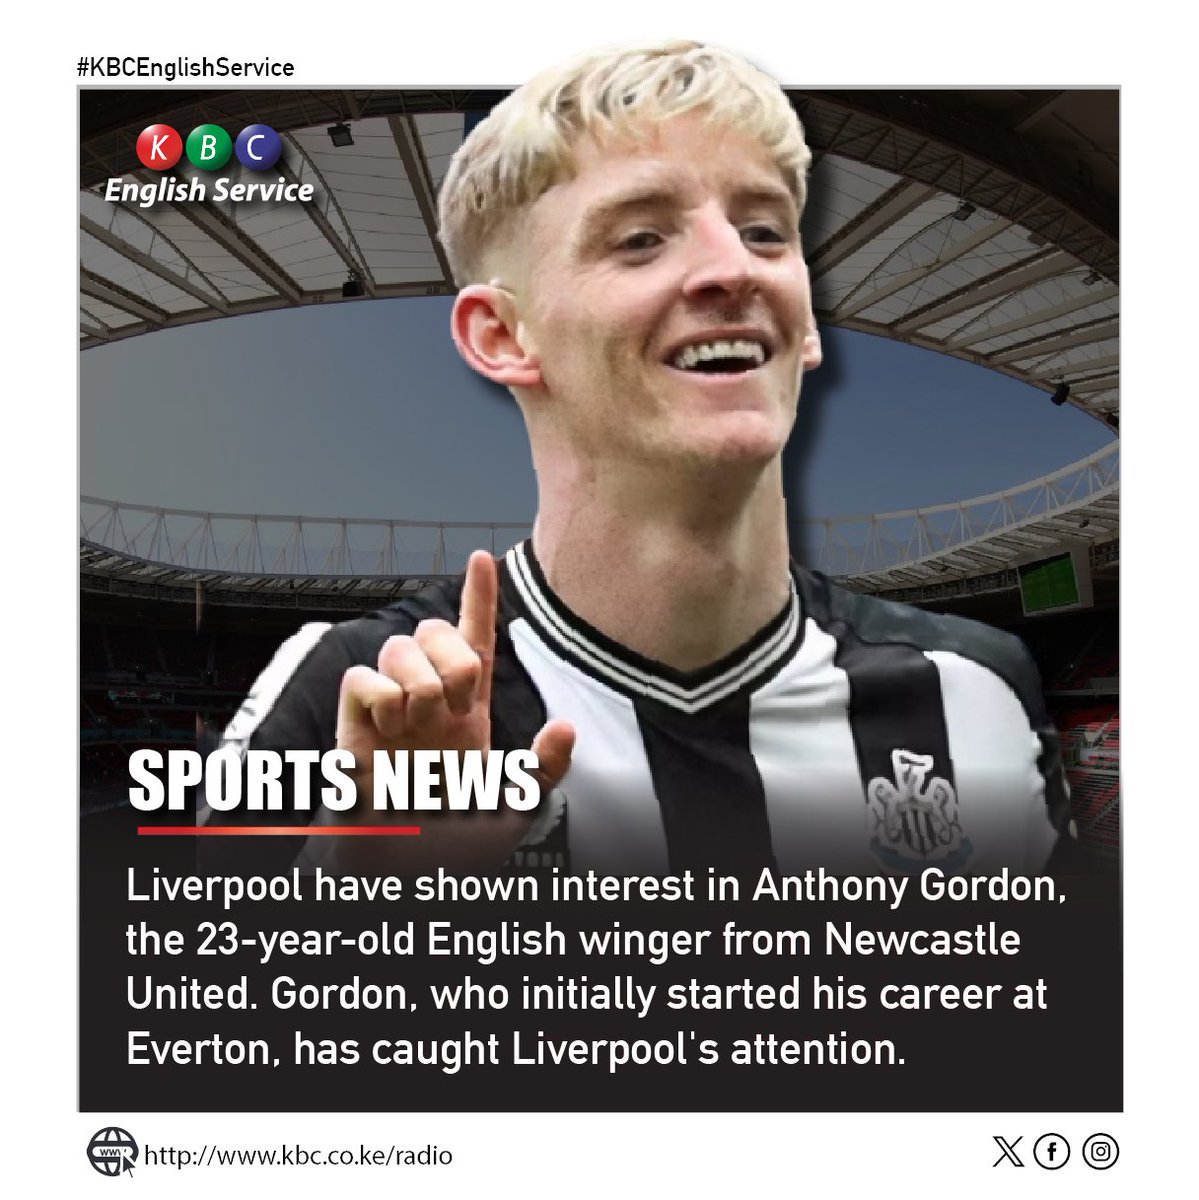 Liverpool have shown interest in Anthony Gordon, the 23-year-old English winger from Newcastle United. Gordon, who initially started his career at Everton, has caught Liverpool's attention. ^PMN #KBCEnglishServiceSports #KBCEnglishService